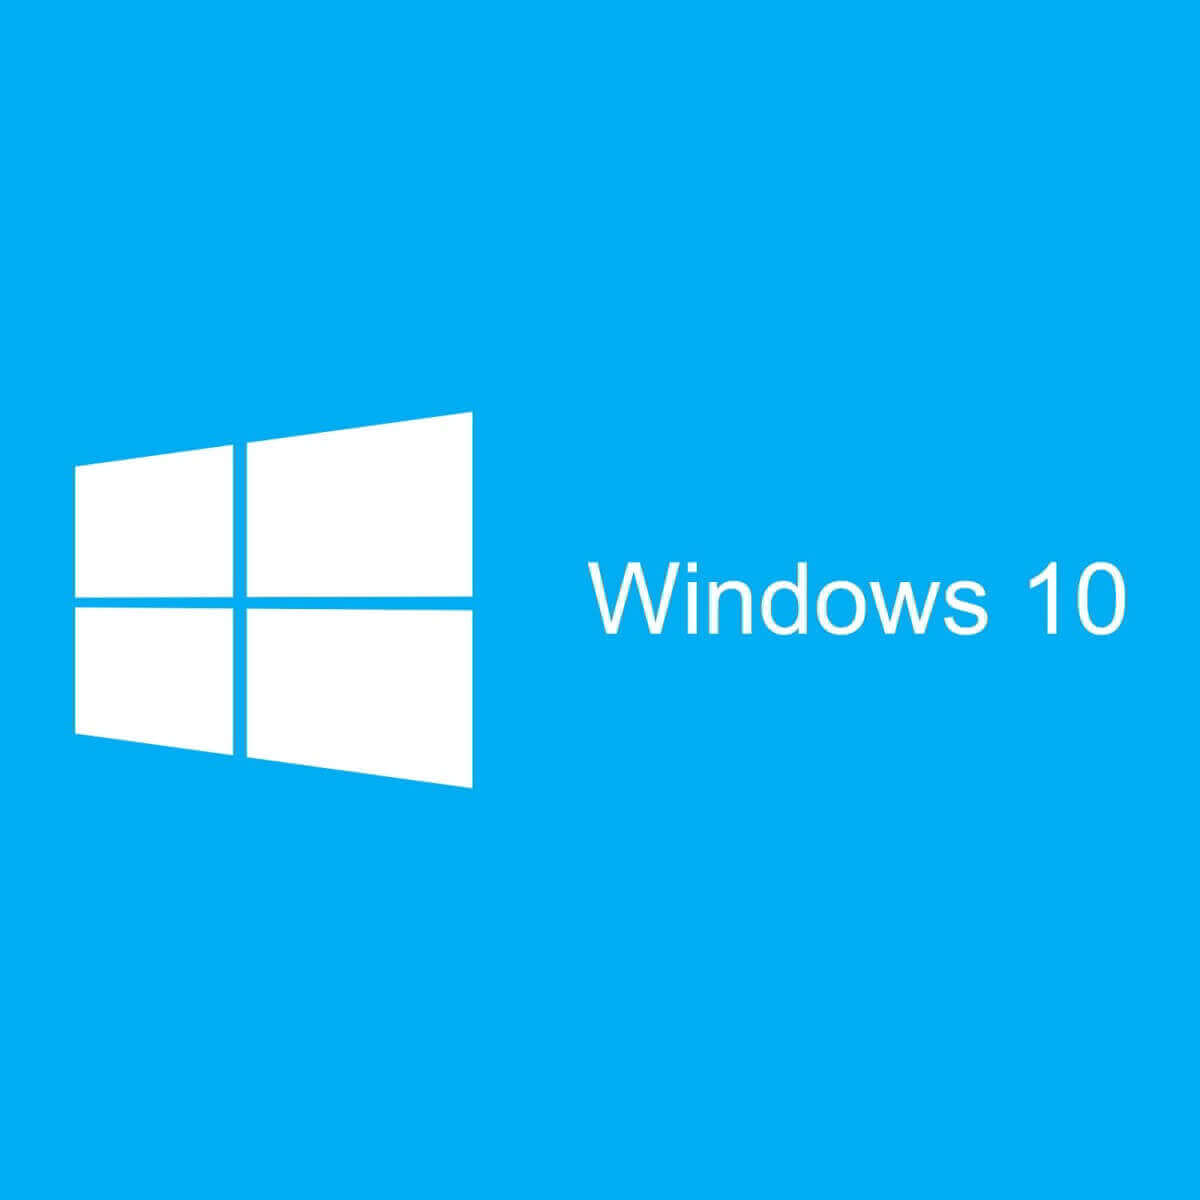 Step-by-step guide to How to move Windows 10 to an external hard drive